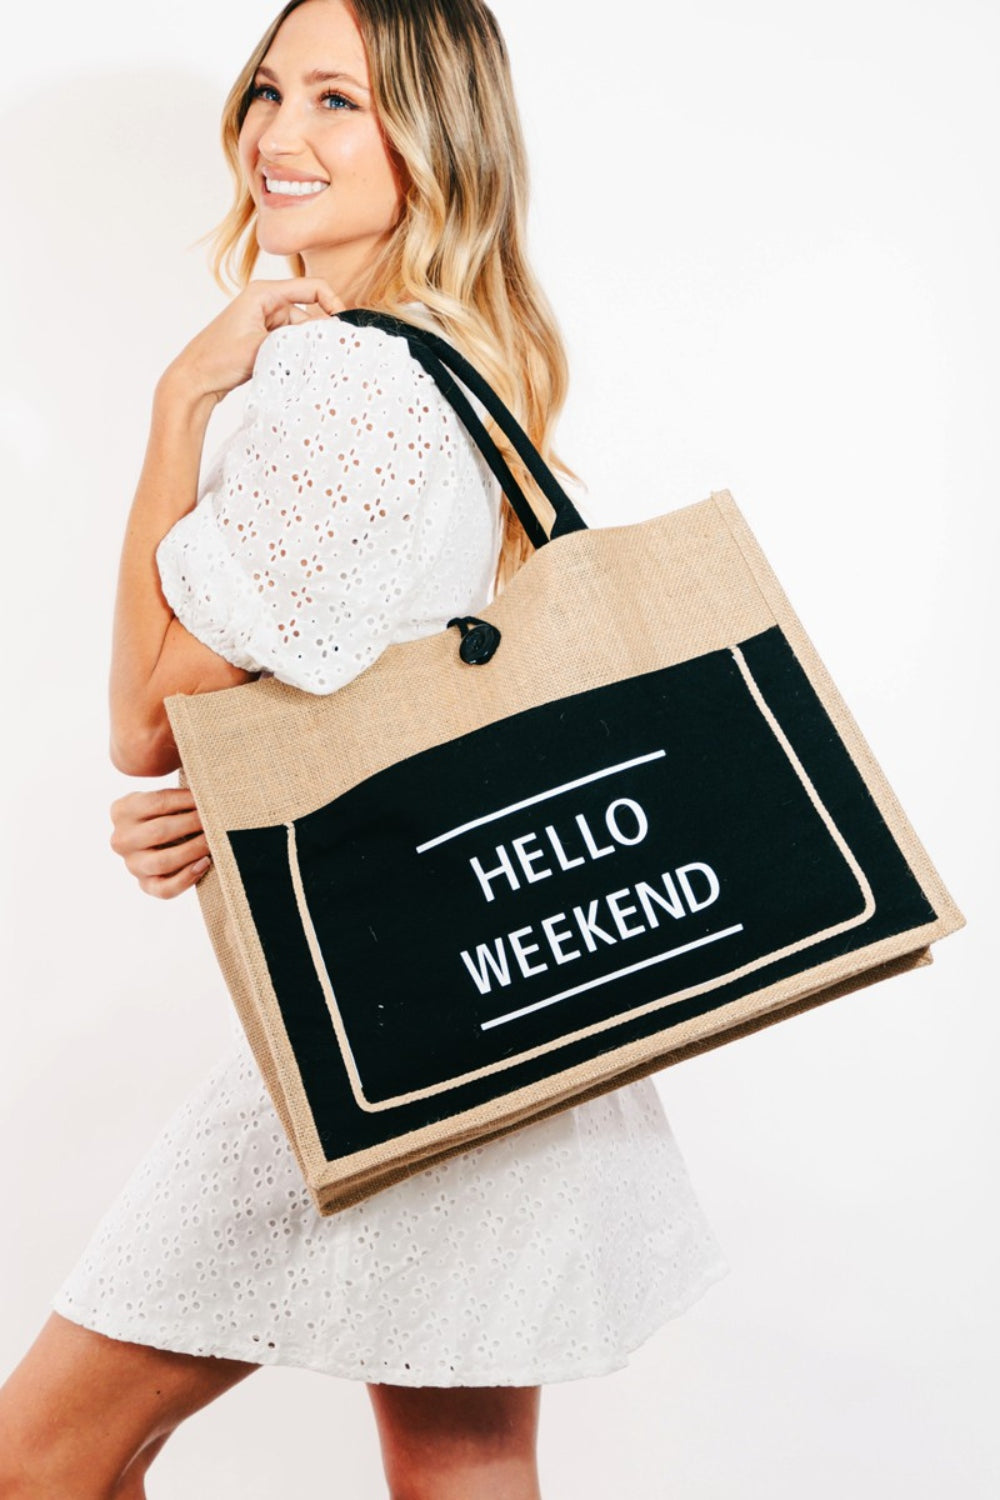 Say hello weekend for laptop bag - Wild Willows Boutique NY – Massapequa, New York. Affordable and fashionable clothing for women of all ages. Bottoms, tops, dresses, intimates, outerwear, sweaters, shoes, accessories, jewelry, activewear and more//wild Willow Boutique